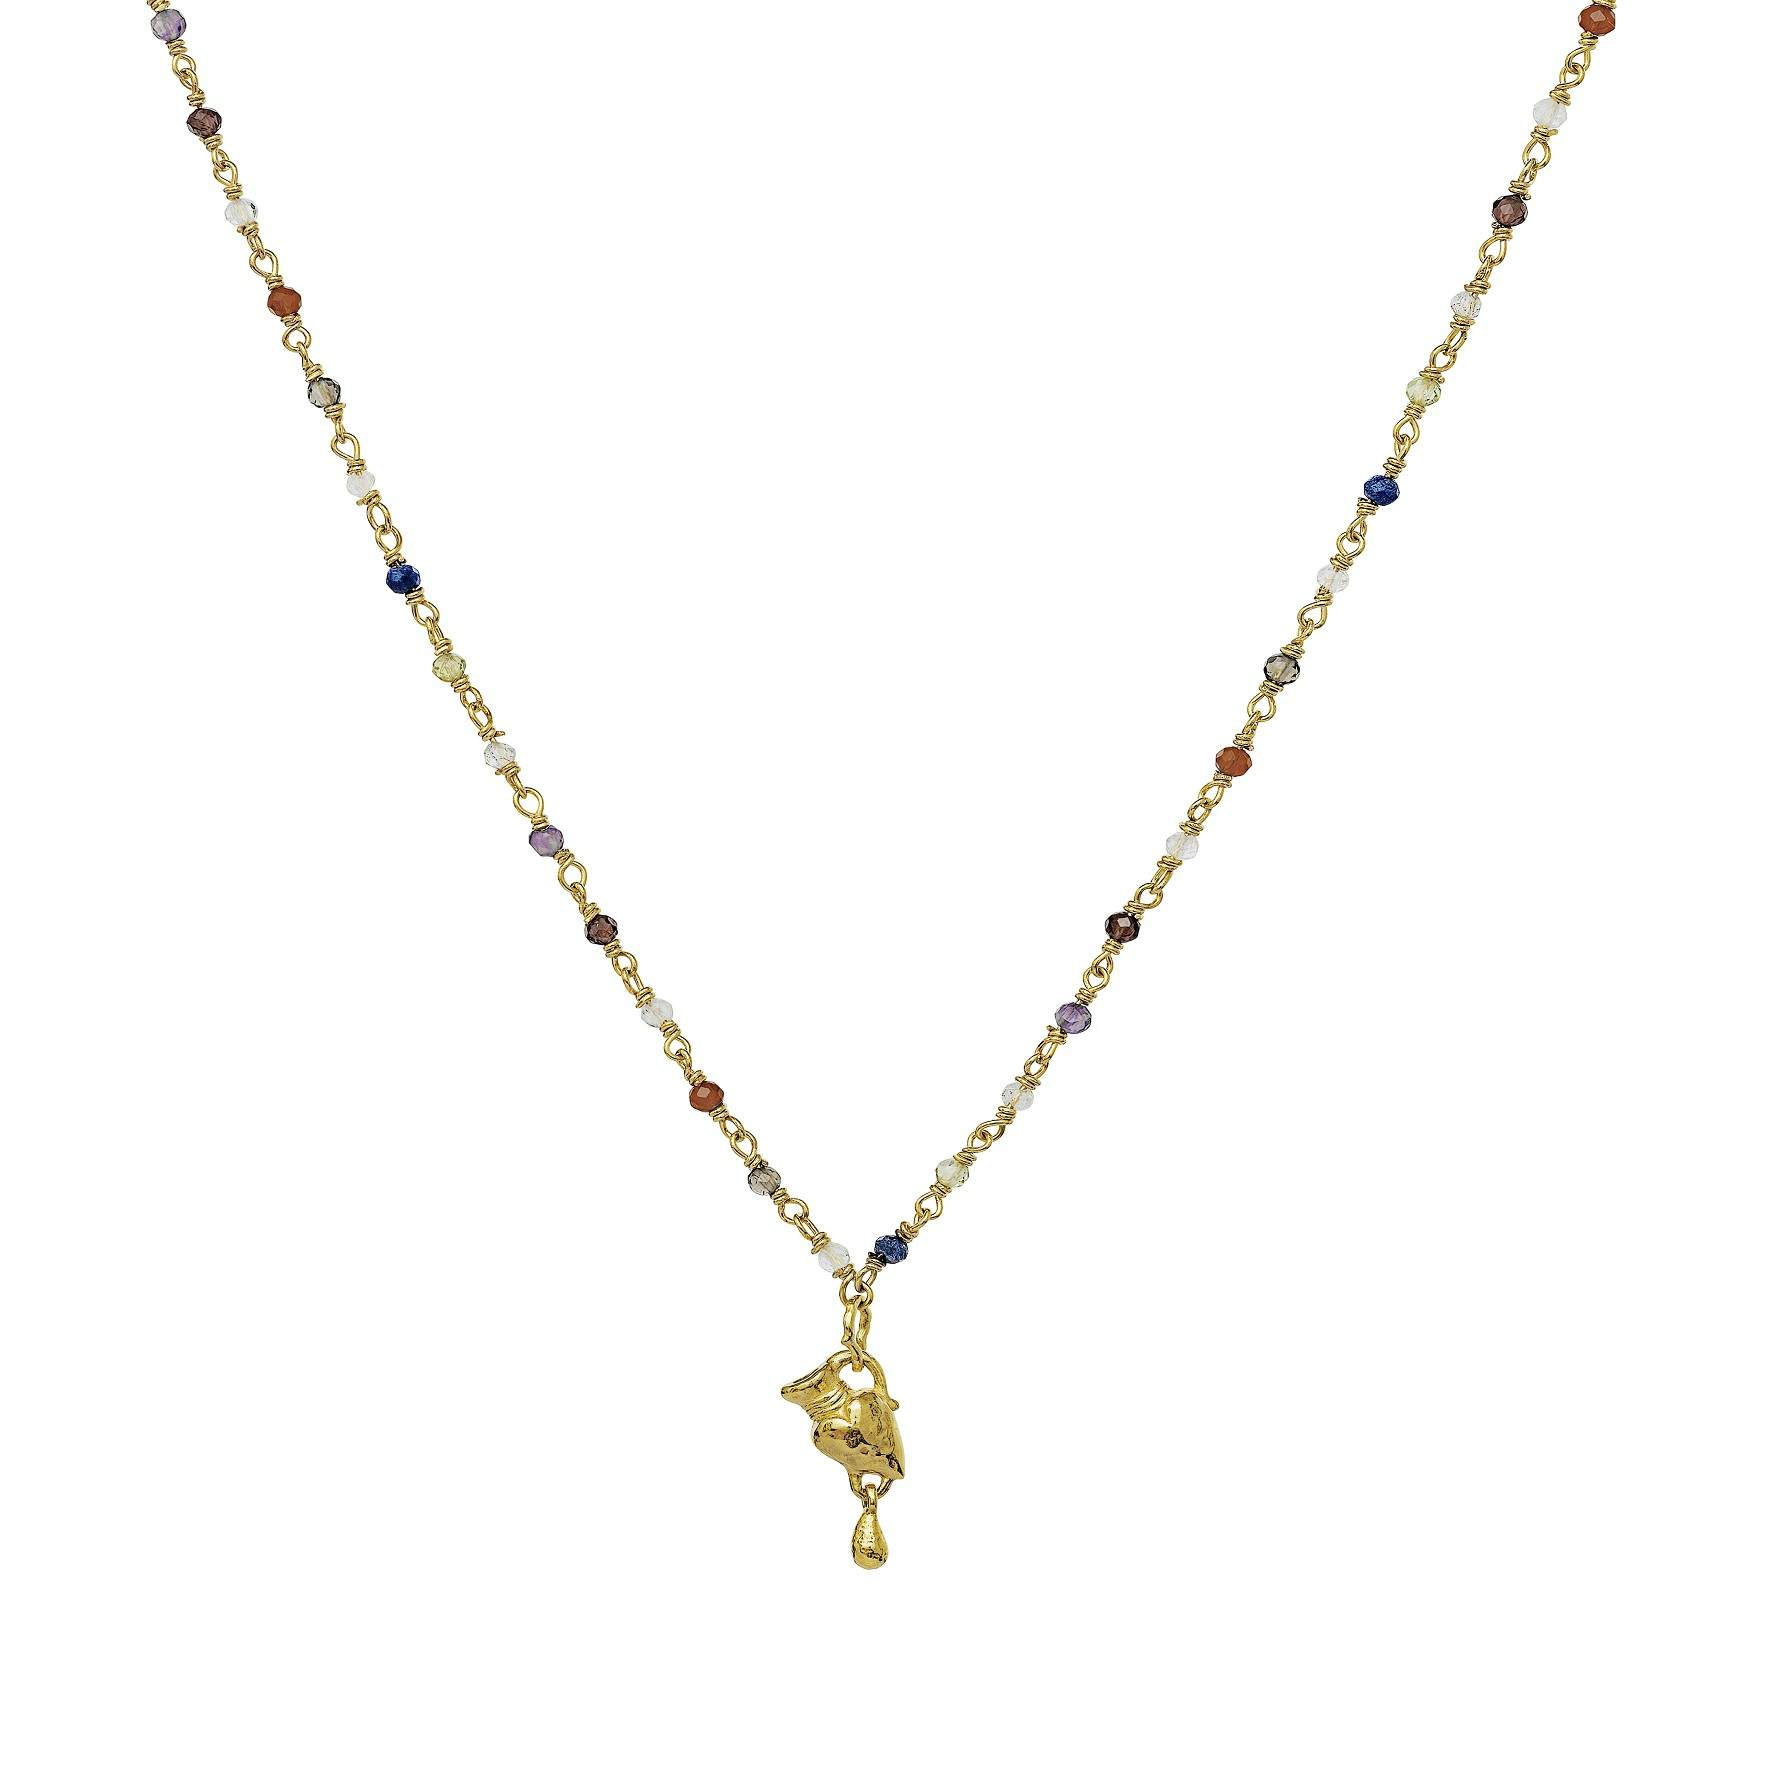 Aphrodite Necklace from Maanesten in Goldplated-Silver Sterling 925